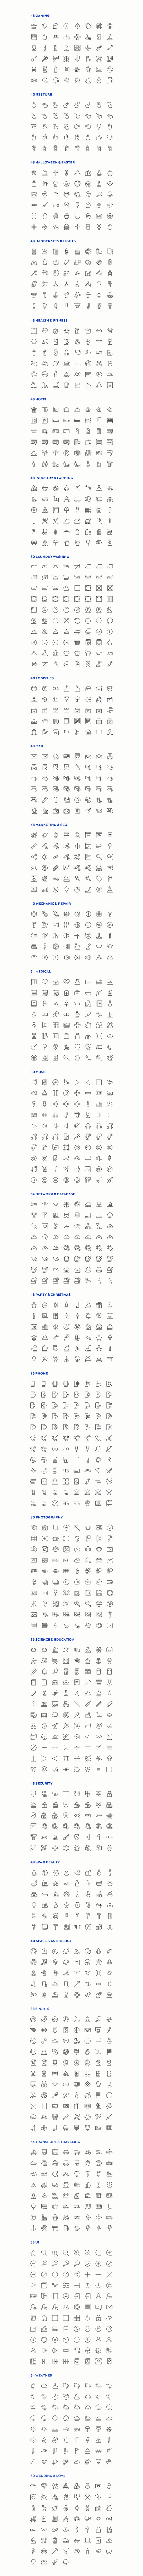 Slimicons - 3300 Line Vector Icons in Line Icons - product preview 6